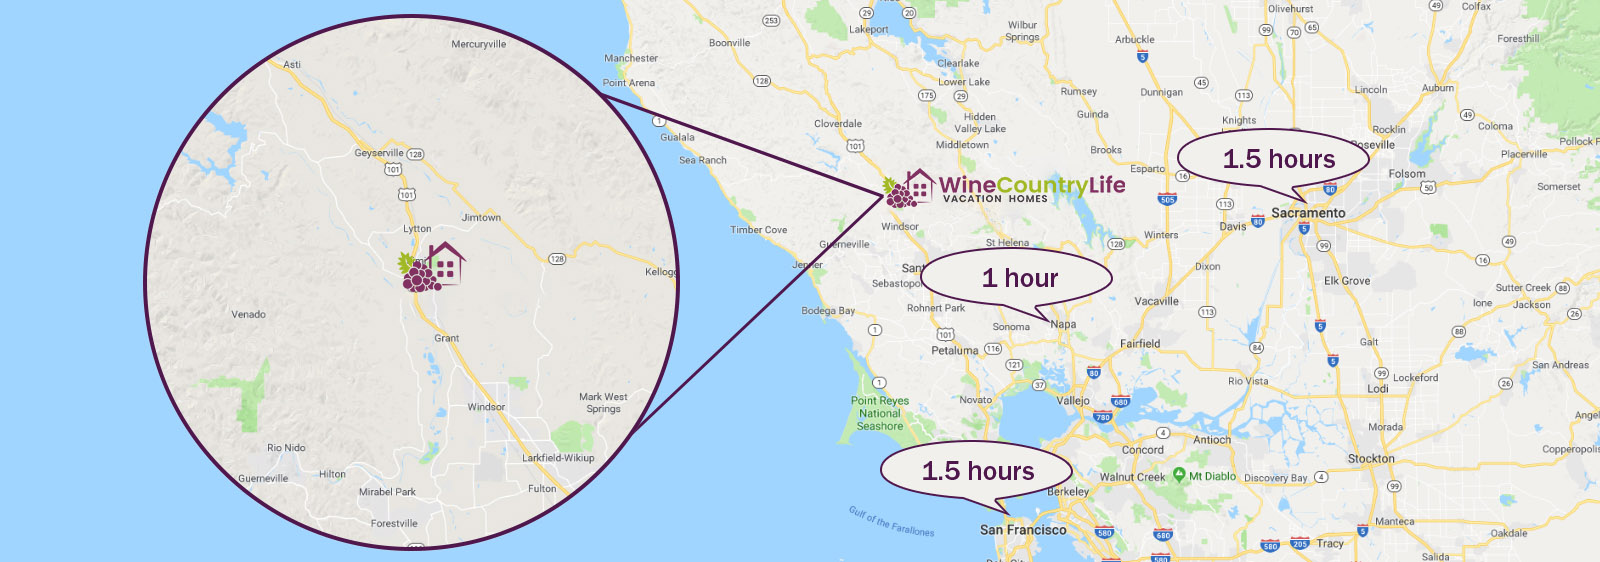 map of wine country area